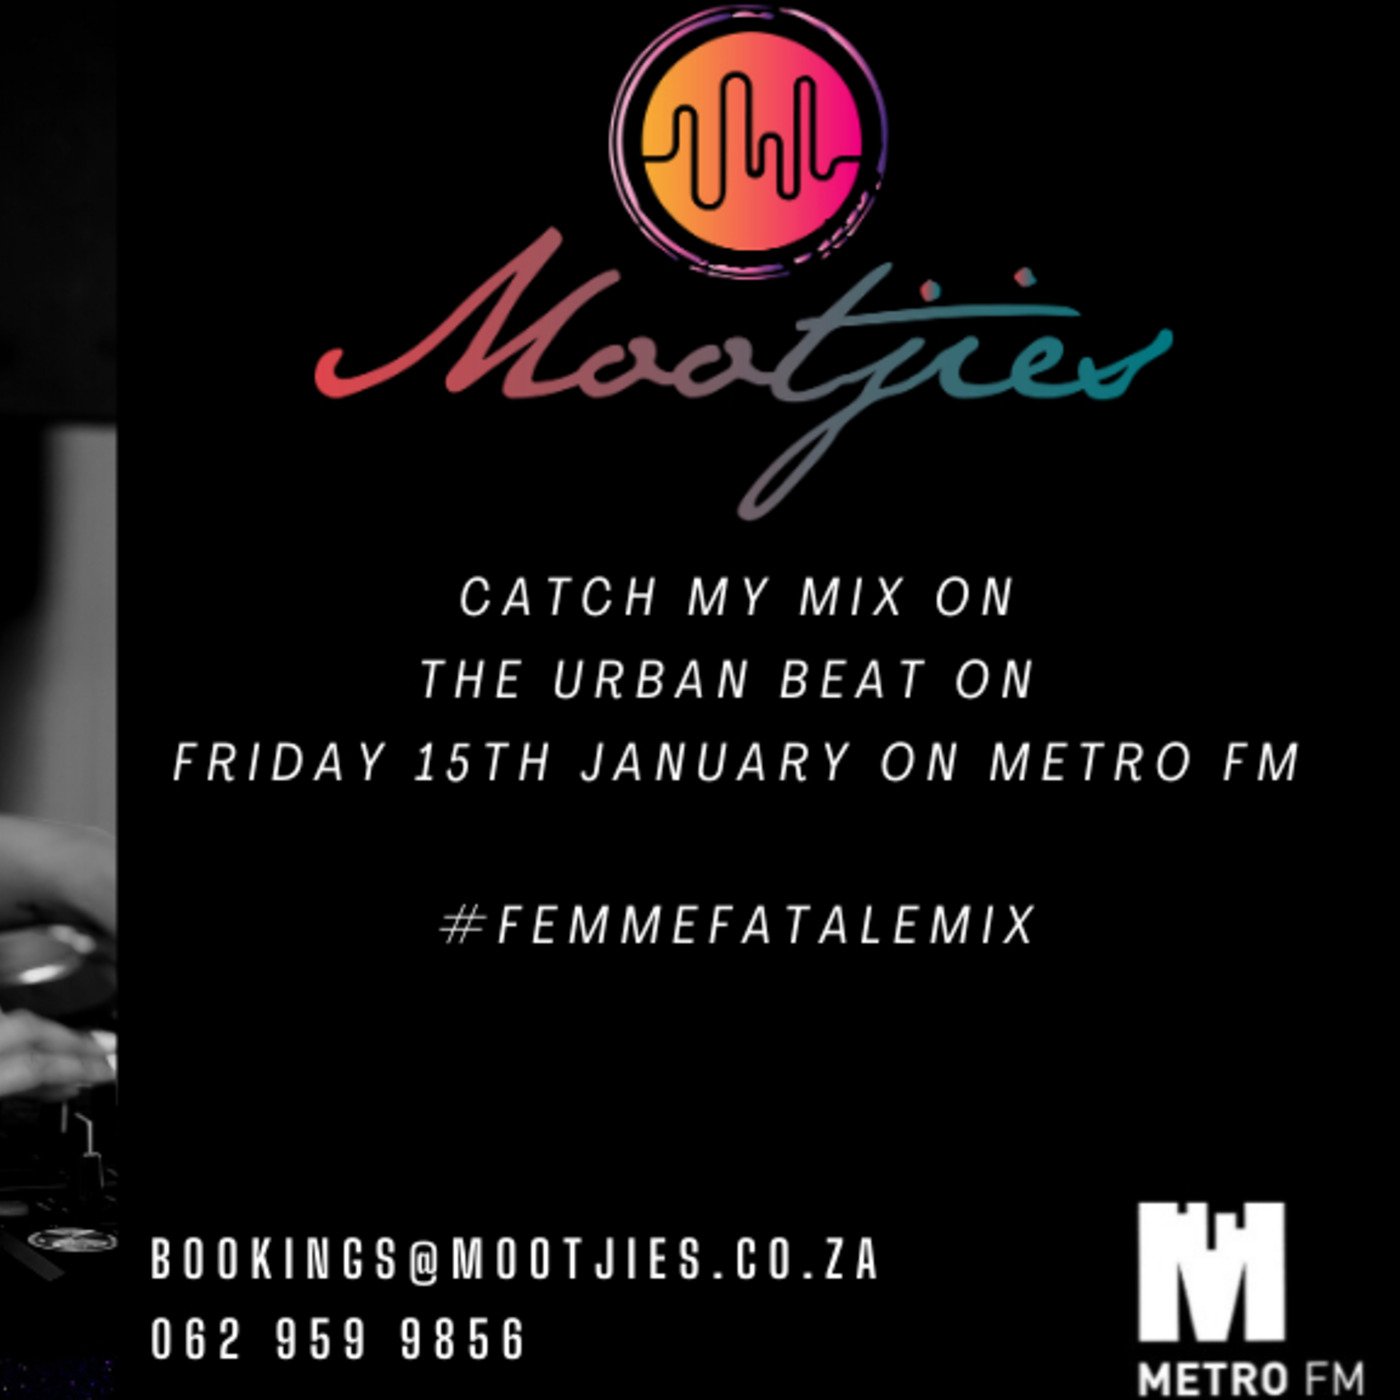 Femme Fatale (Urban Beat Metro FM) - Mixed by Mootjies